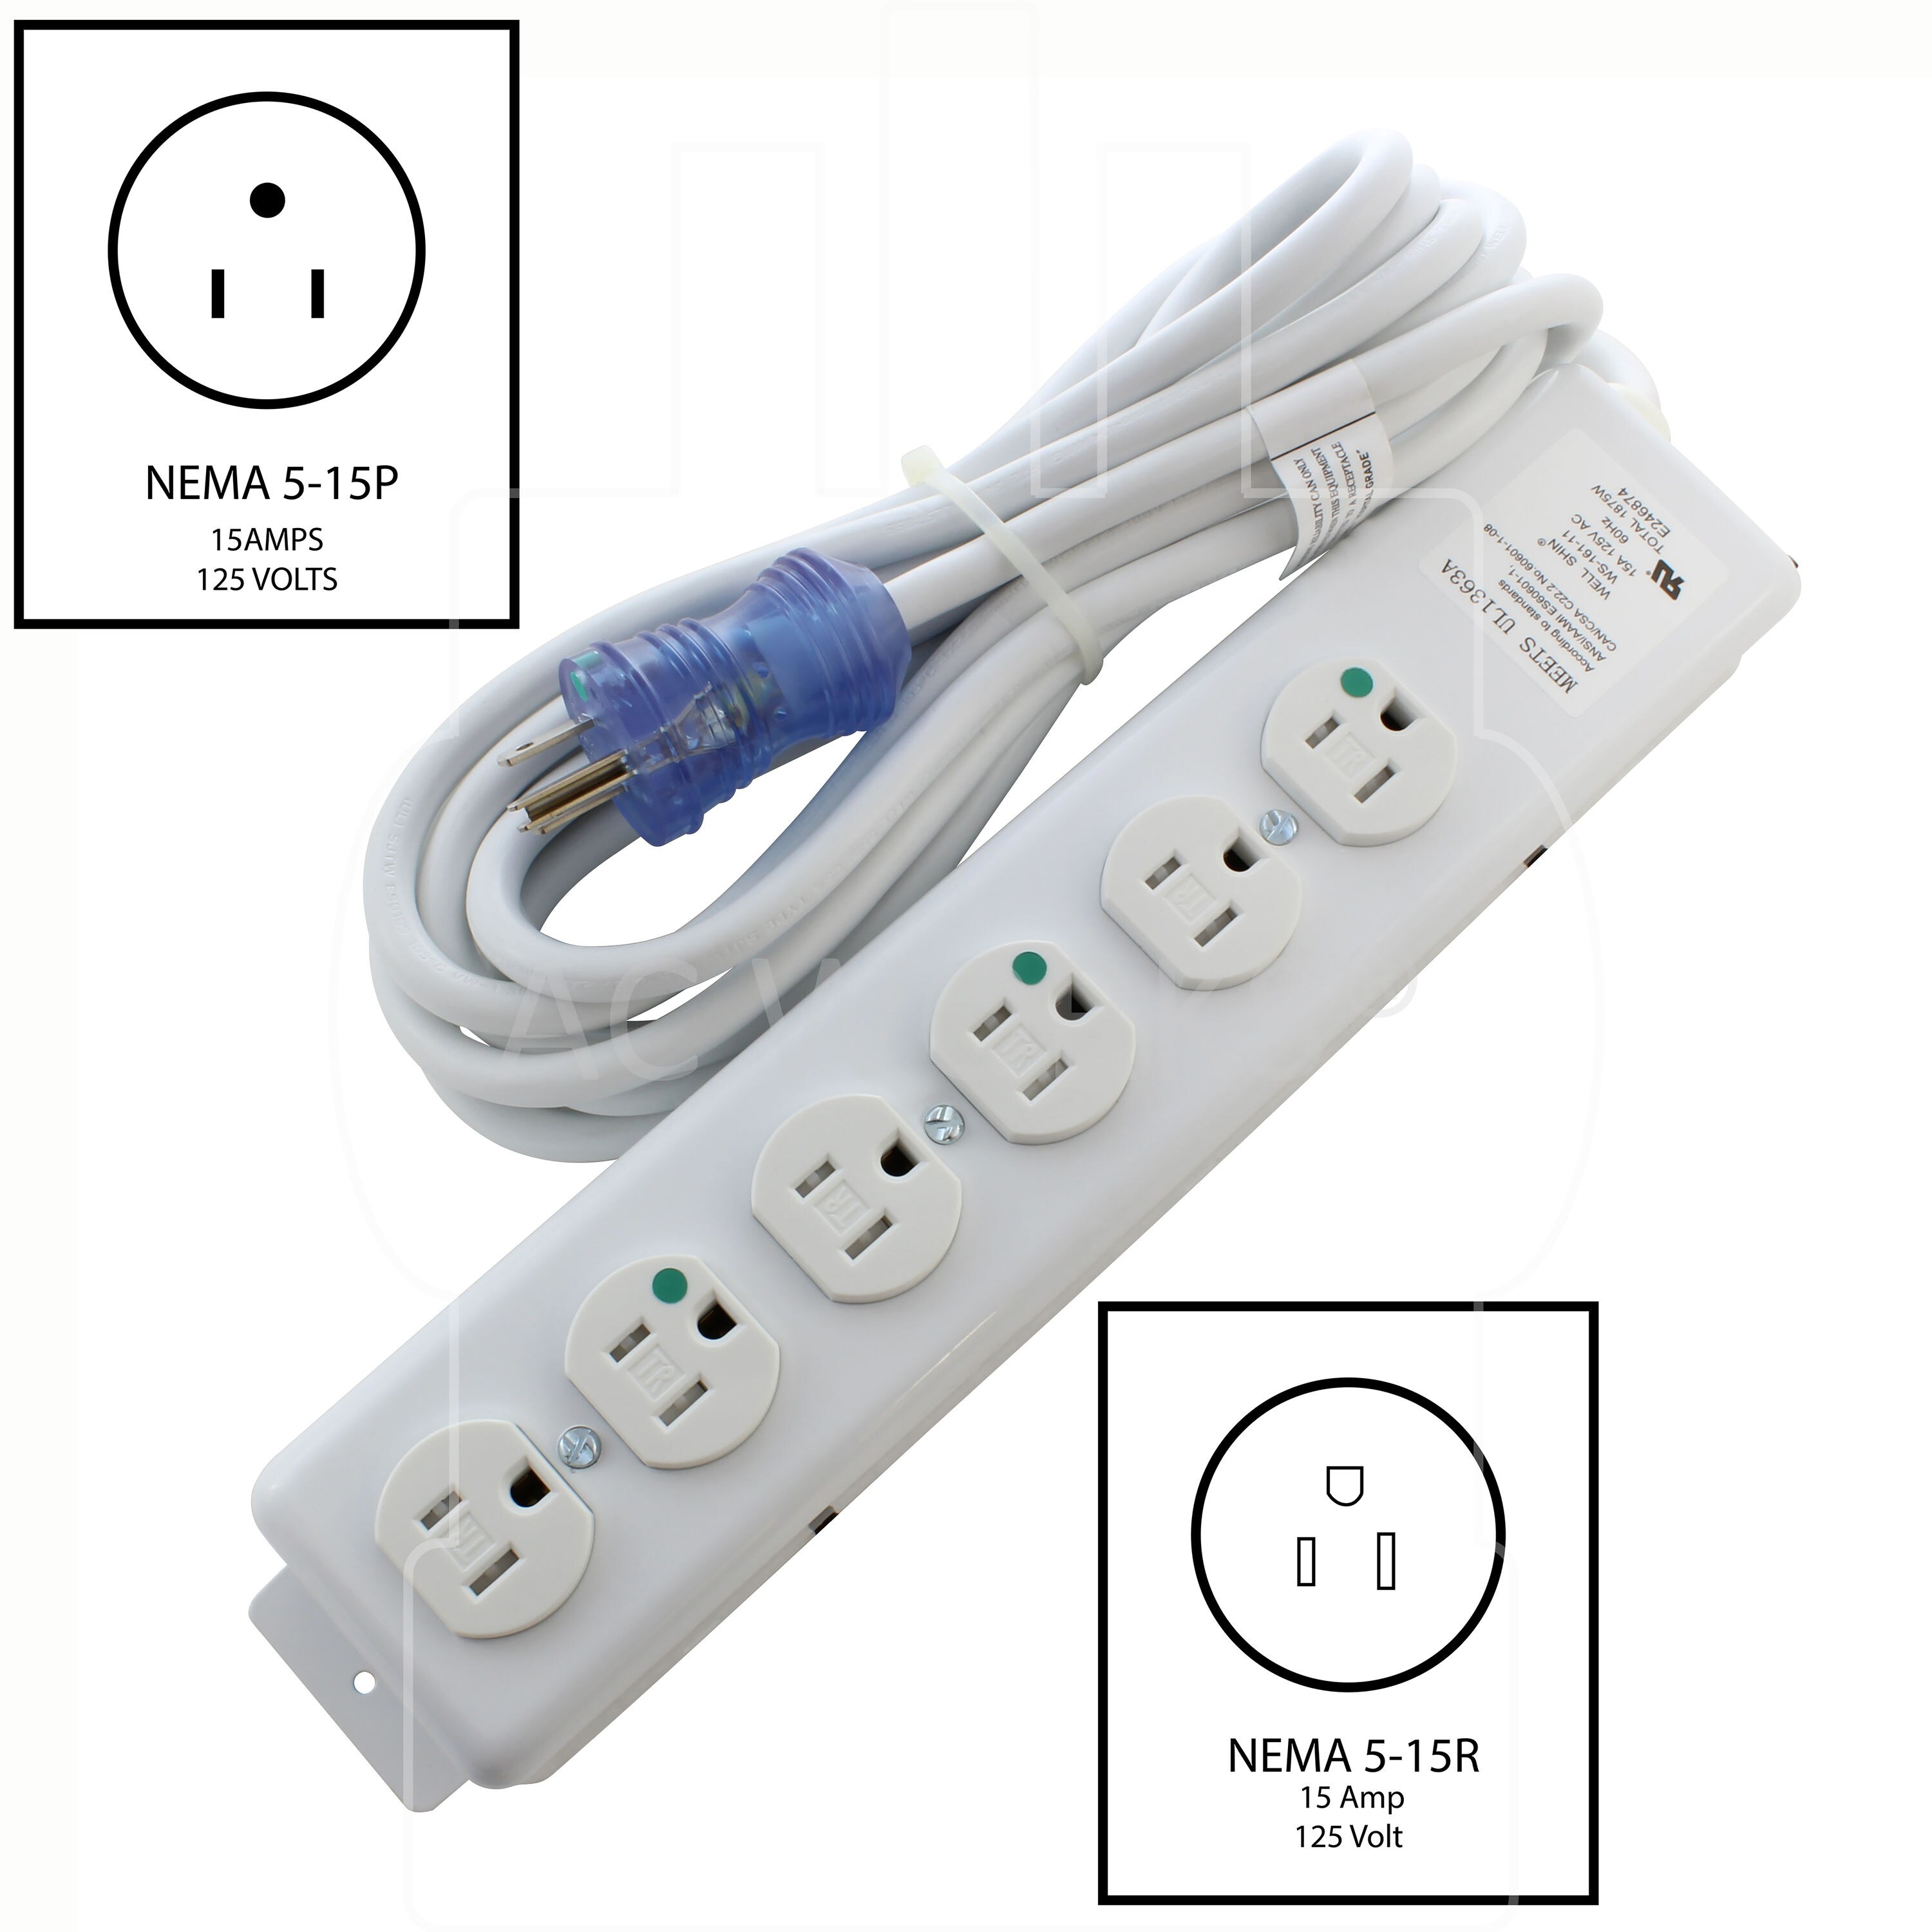 Easylife Tech 6 ft, 4-Outlet, Power Strip Surge Protector - White